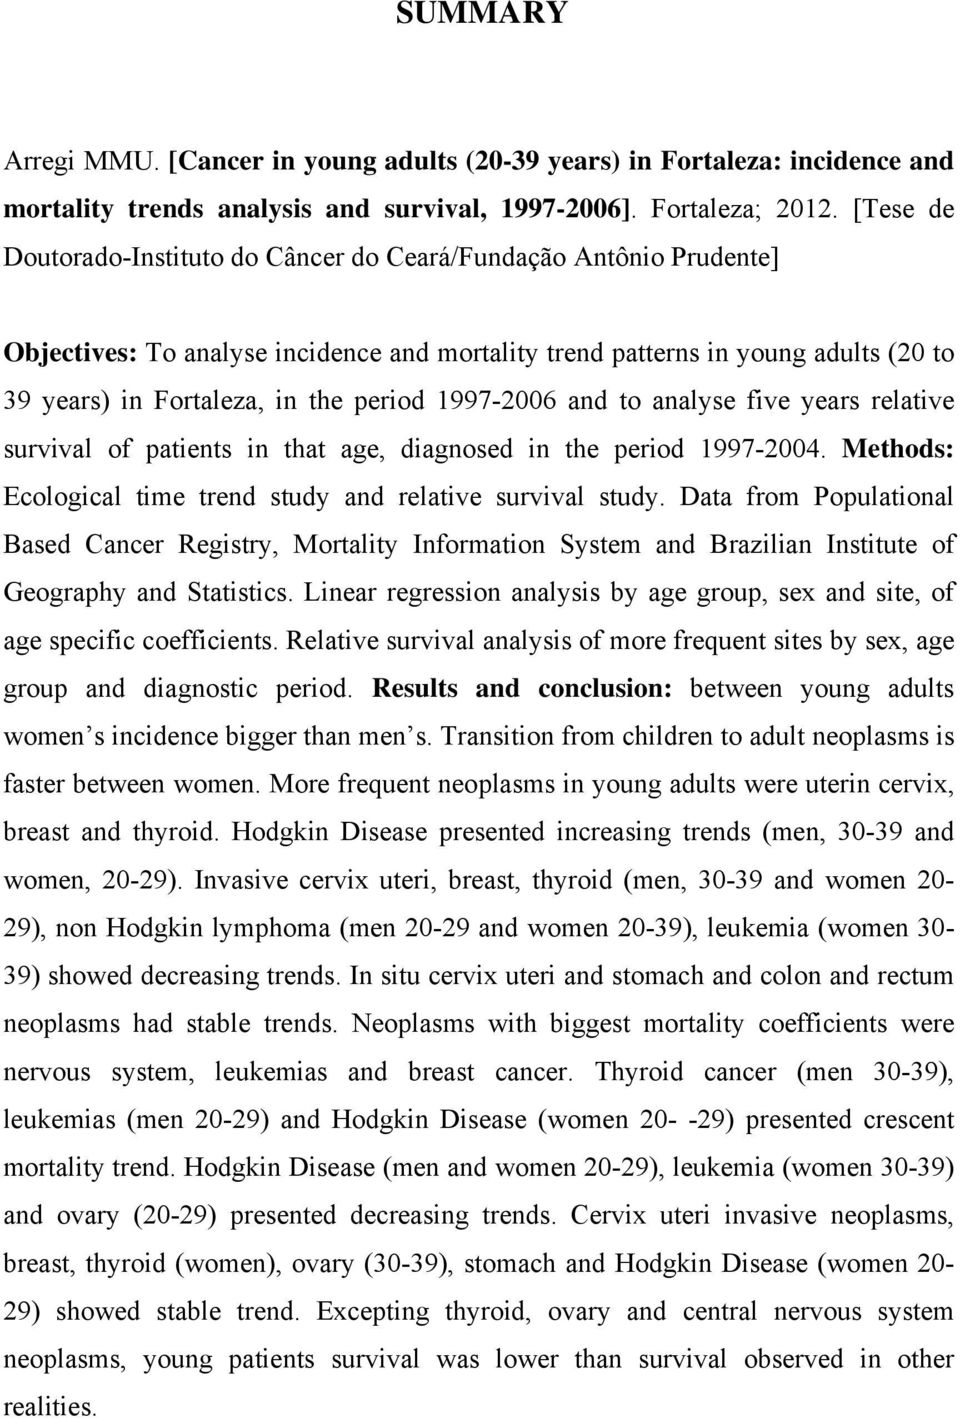 1997-2006 and to analyse five years relative survival of patients in that age, diagnosed in the period 1997-2004. Methods: Ecological time trend study and relative survival study.